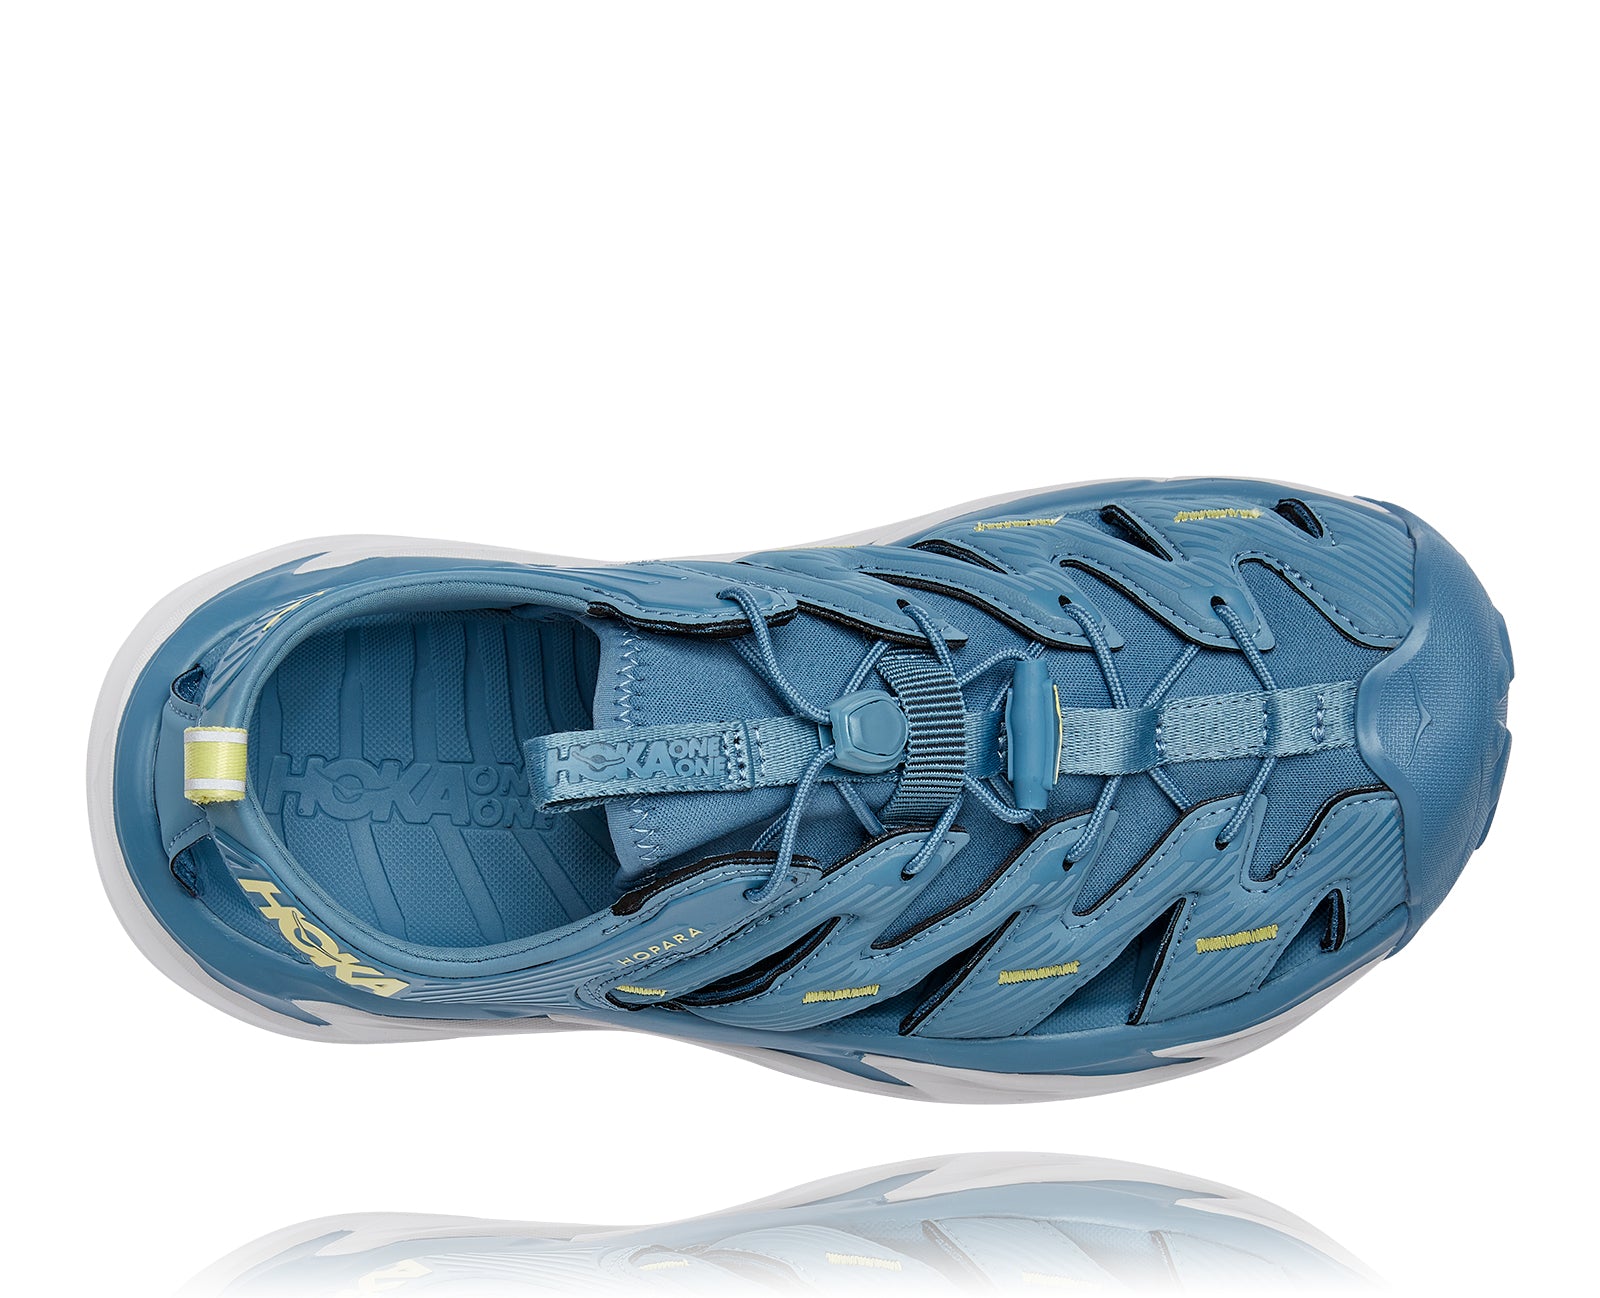 Providing a responsive yet cushioned feel thanks to a rubberized EVA midsole, the Women's Hoka Hopara also features a rubberized toe cap for protection and a sticky rubber outsole for traction in a variety of conditions. Add in 4mm multidirectional lugs for even more grip and the Hopara is your key to adventure.